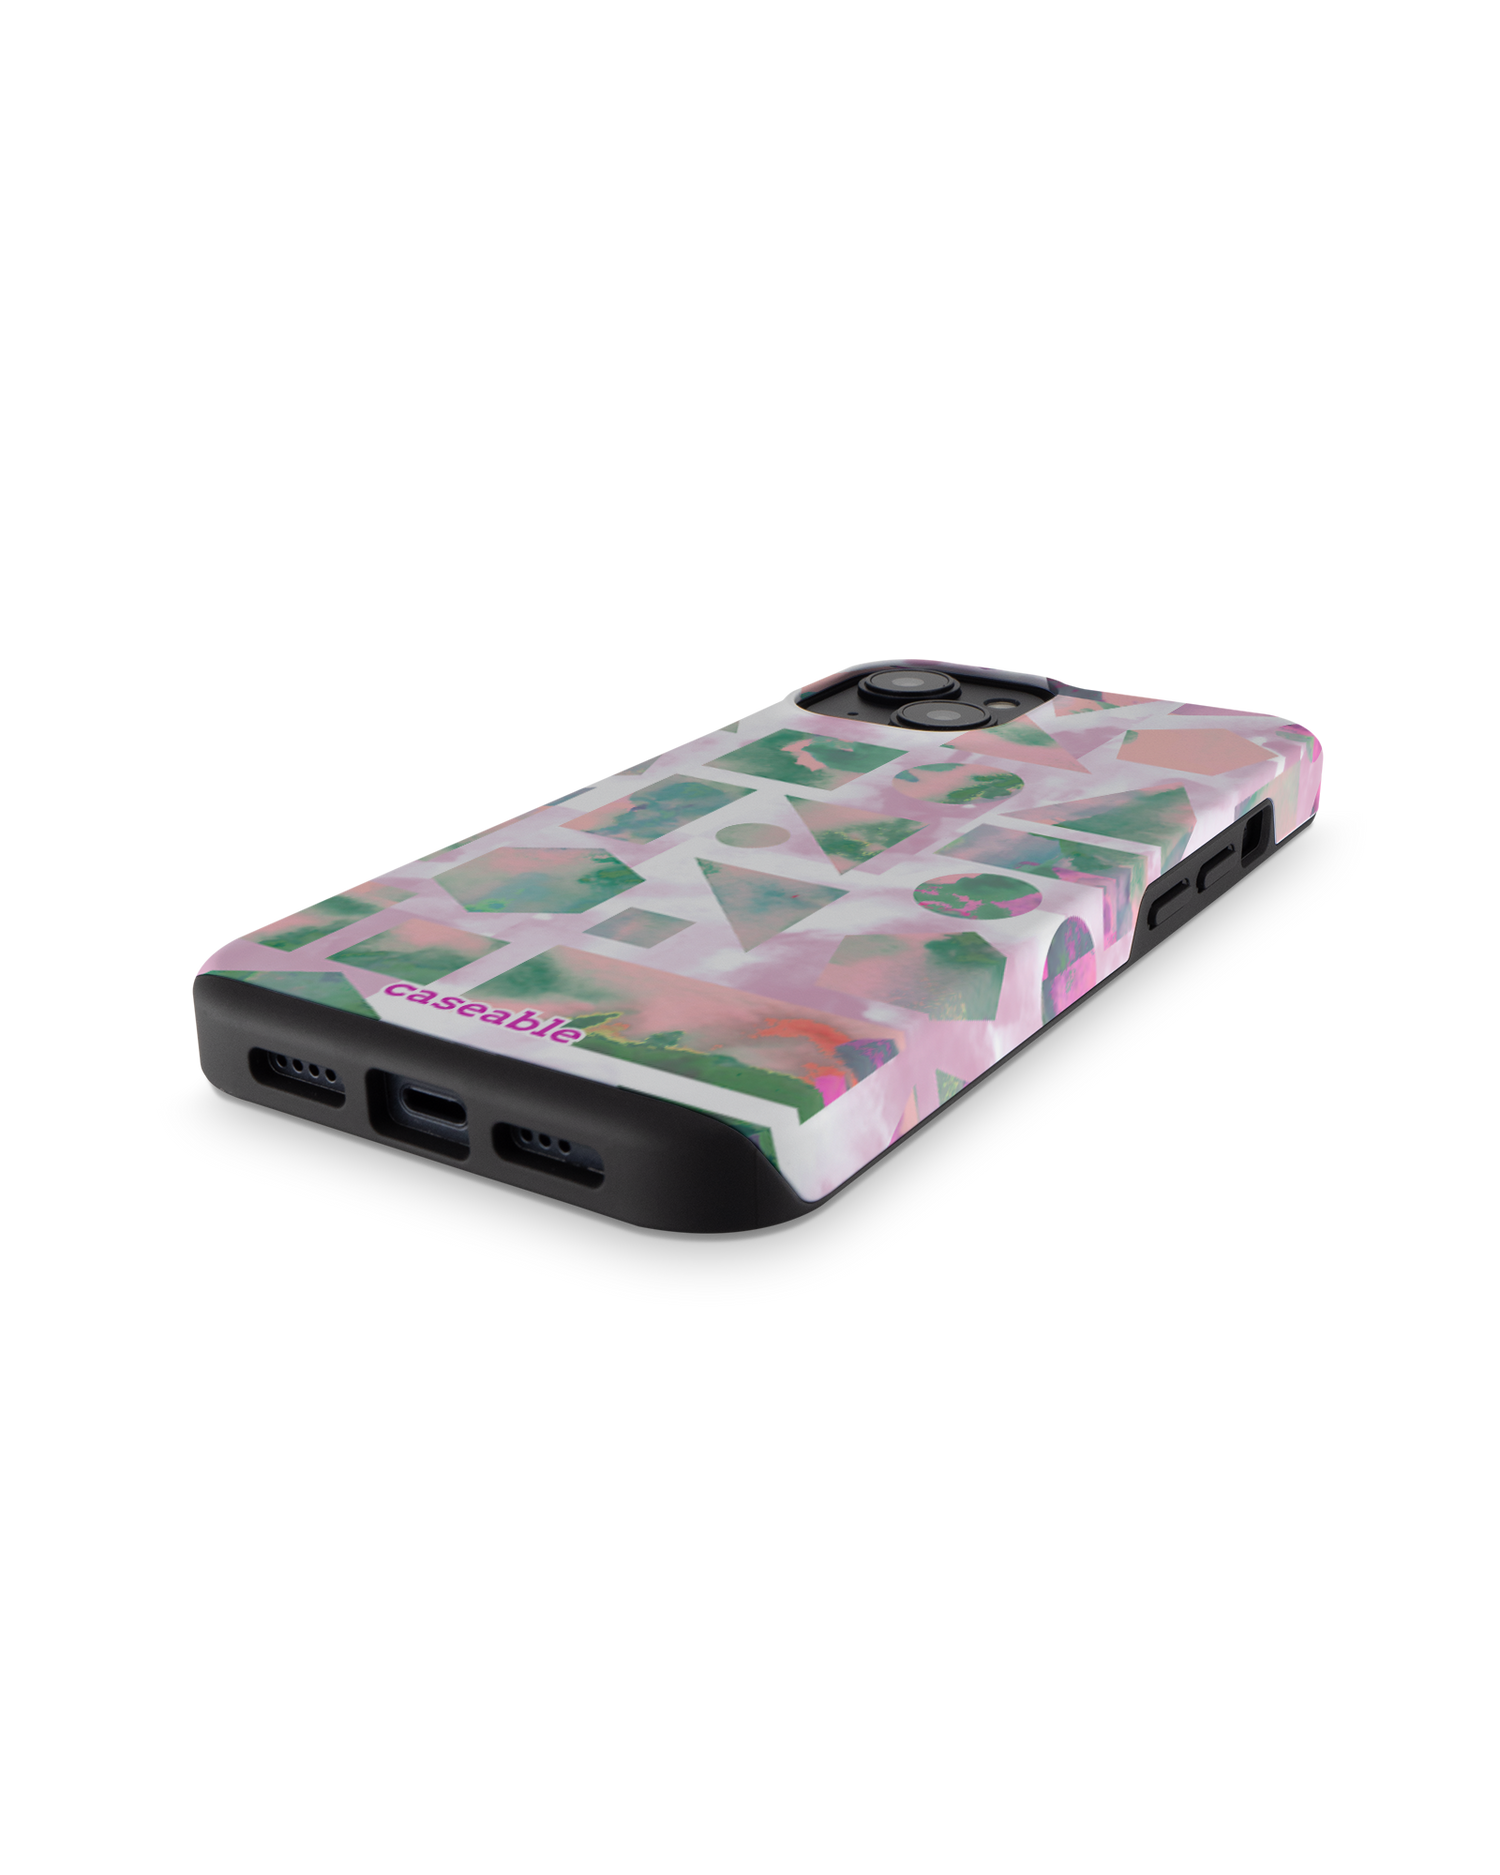 Dreamscapes Premium Phone for Apple iPhone 14: Bottom View